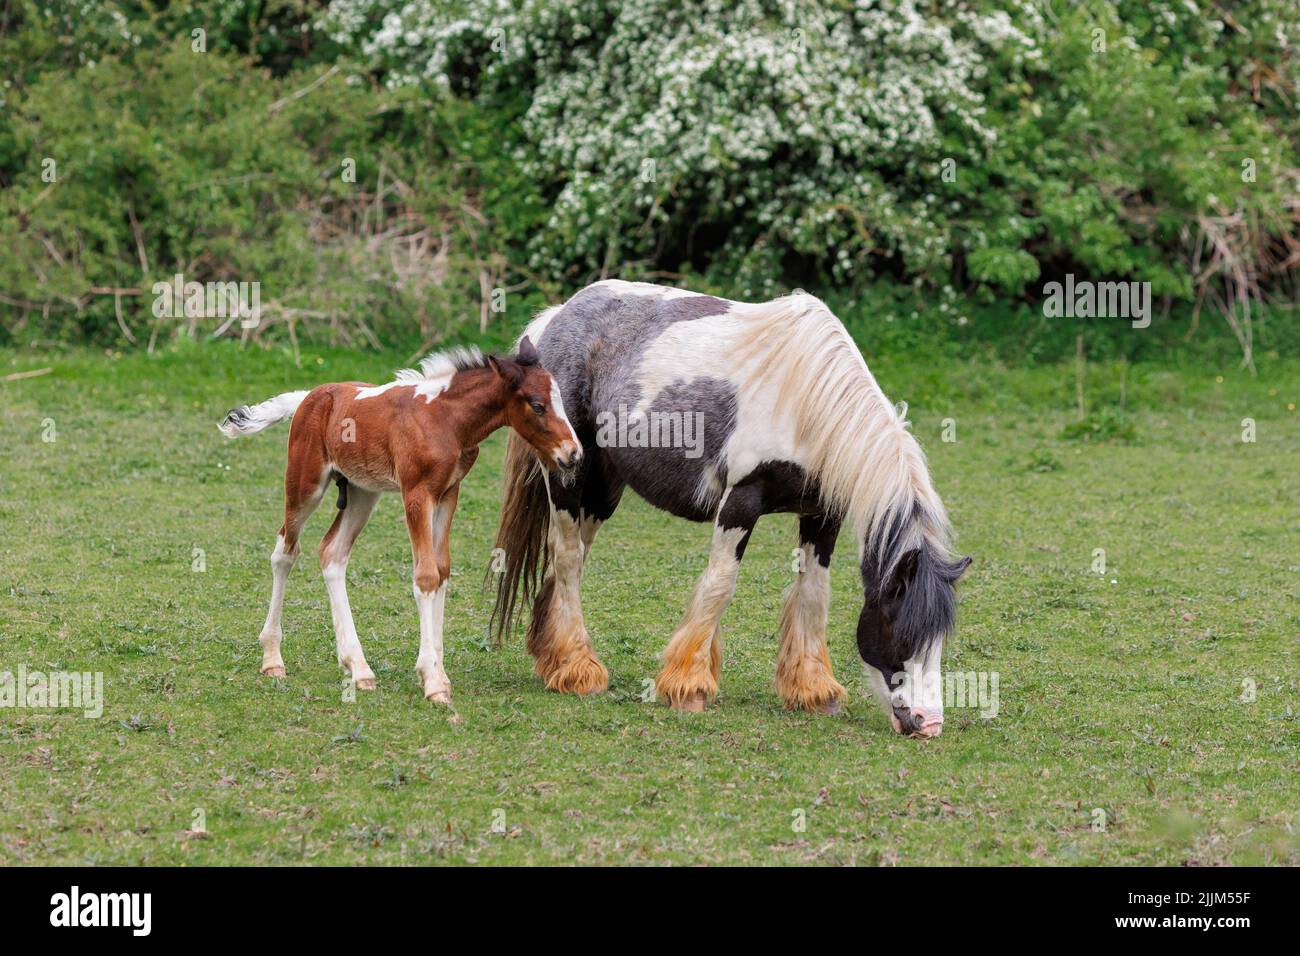 Two horses grazing, a mother with a young newborn foal Stock Photo